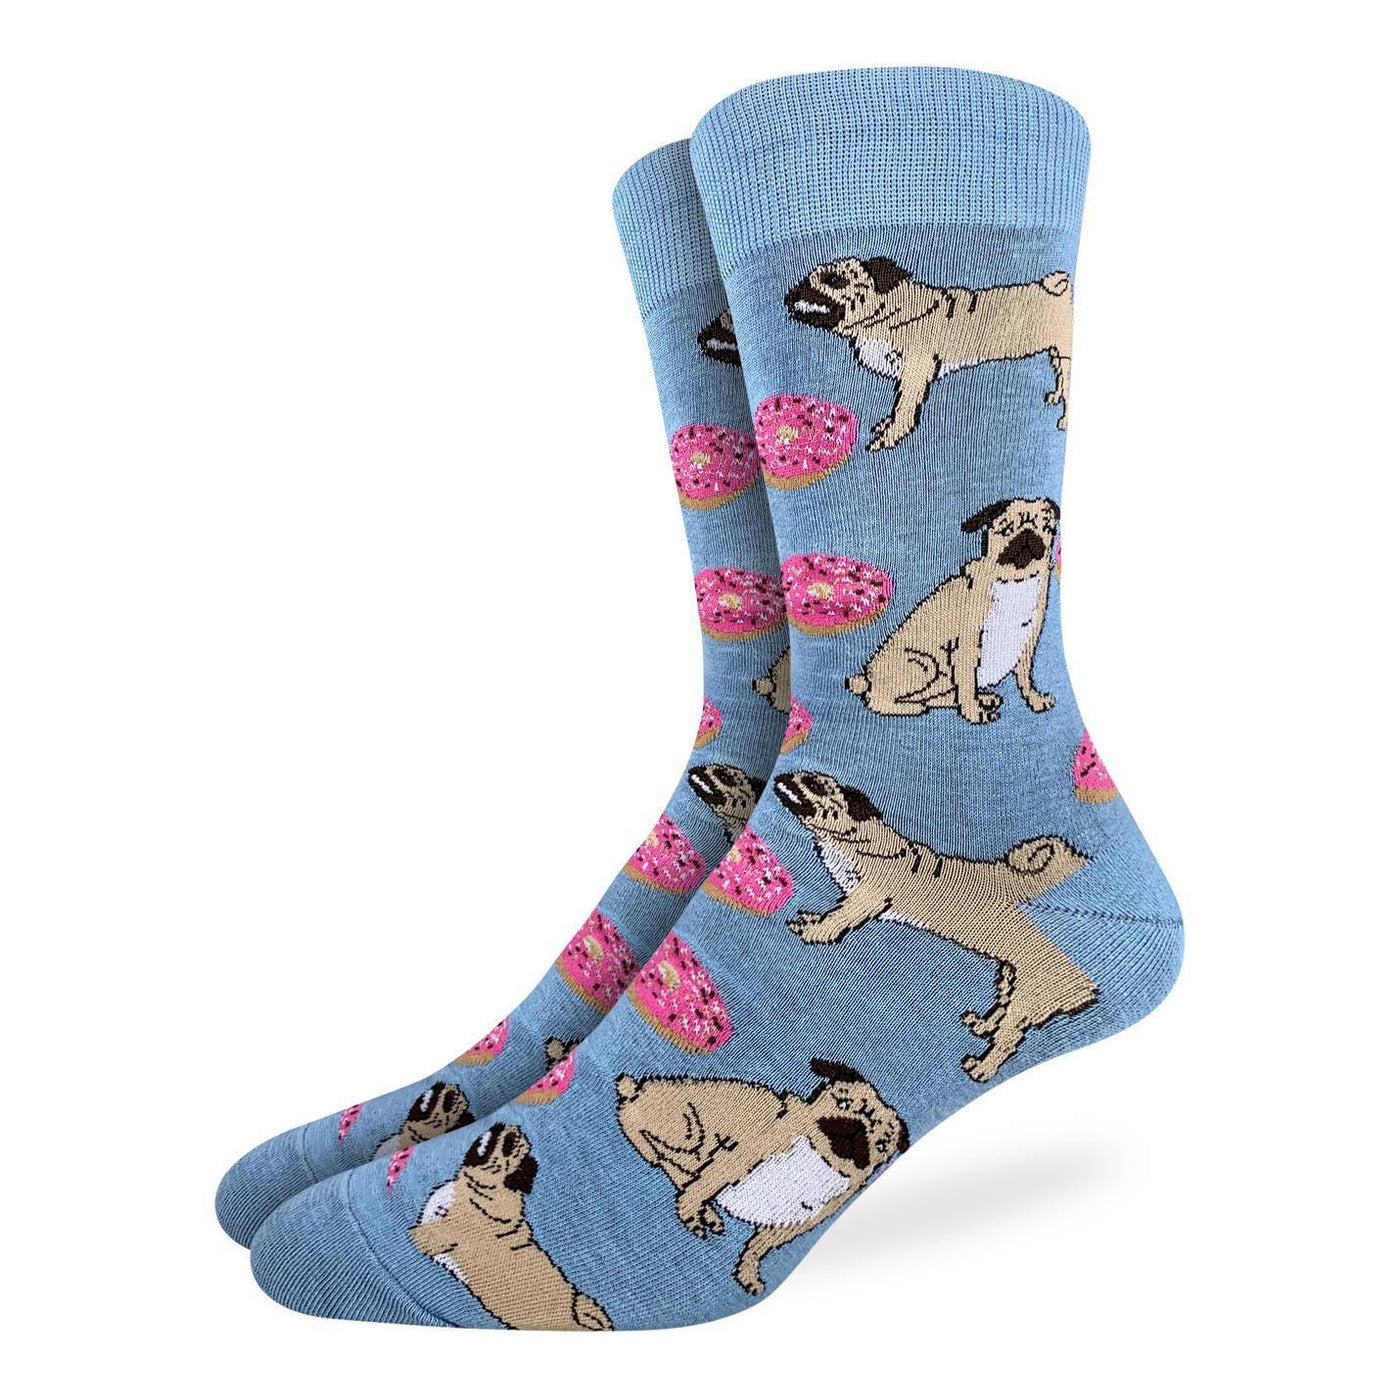 "Pugs and Donuts" Cotton Crew Socks by Good Luck Sock